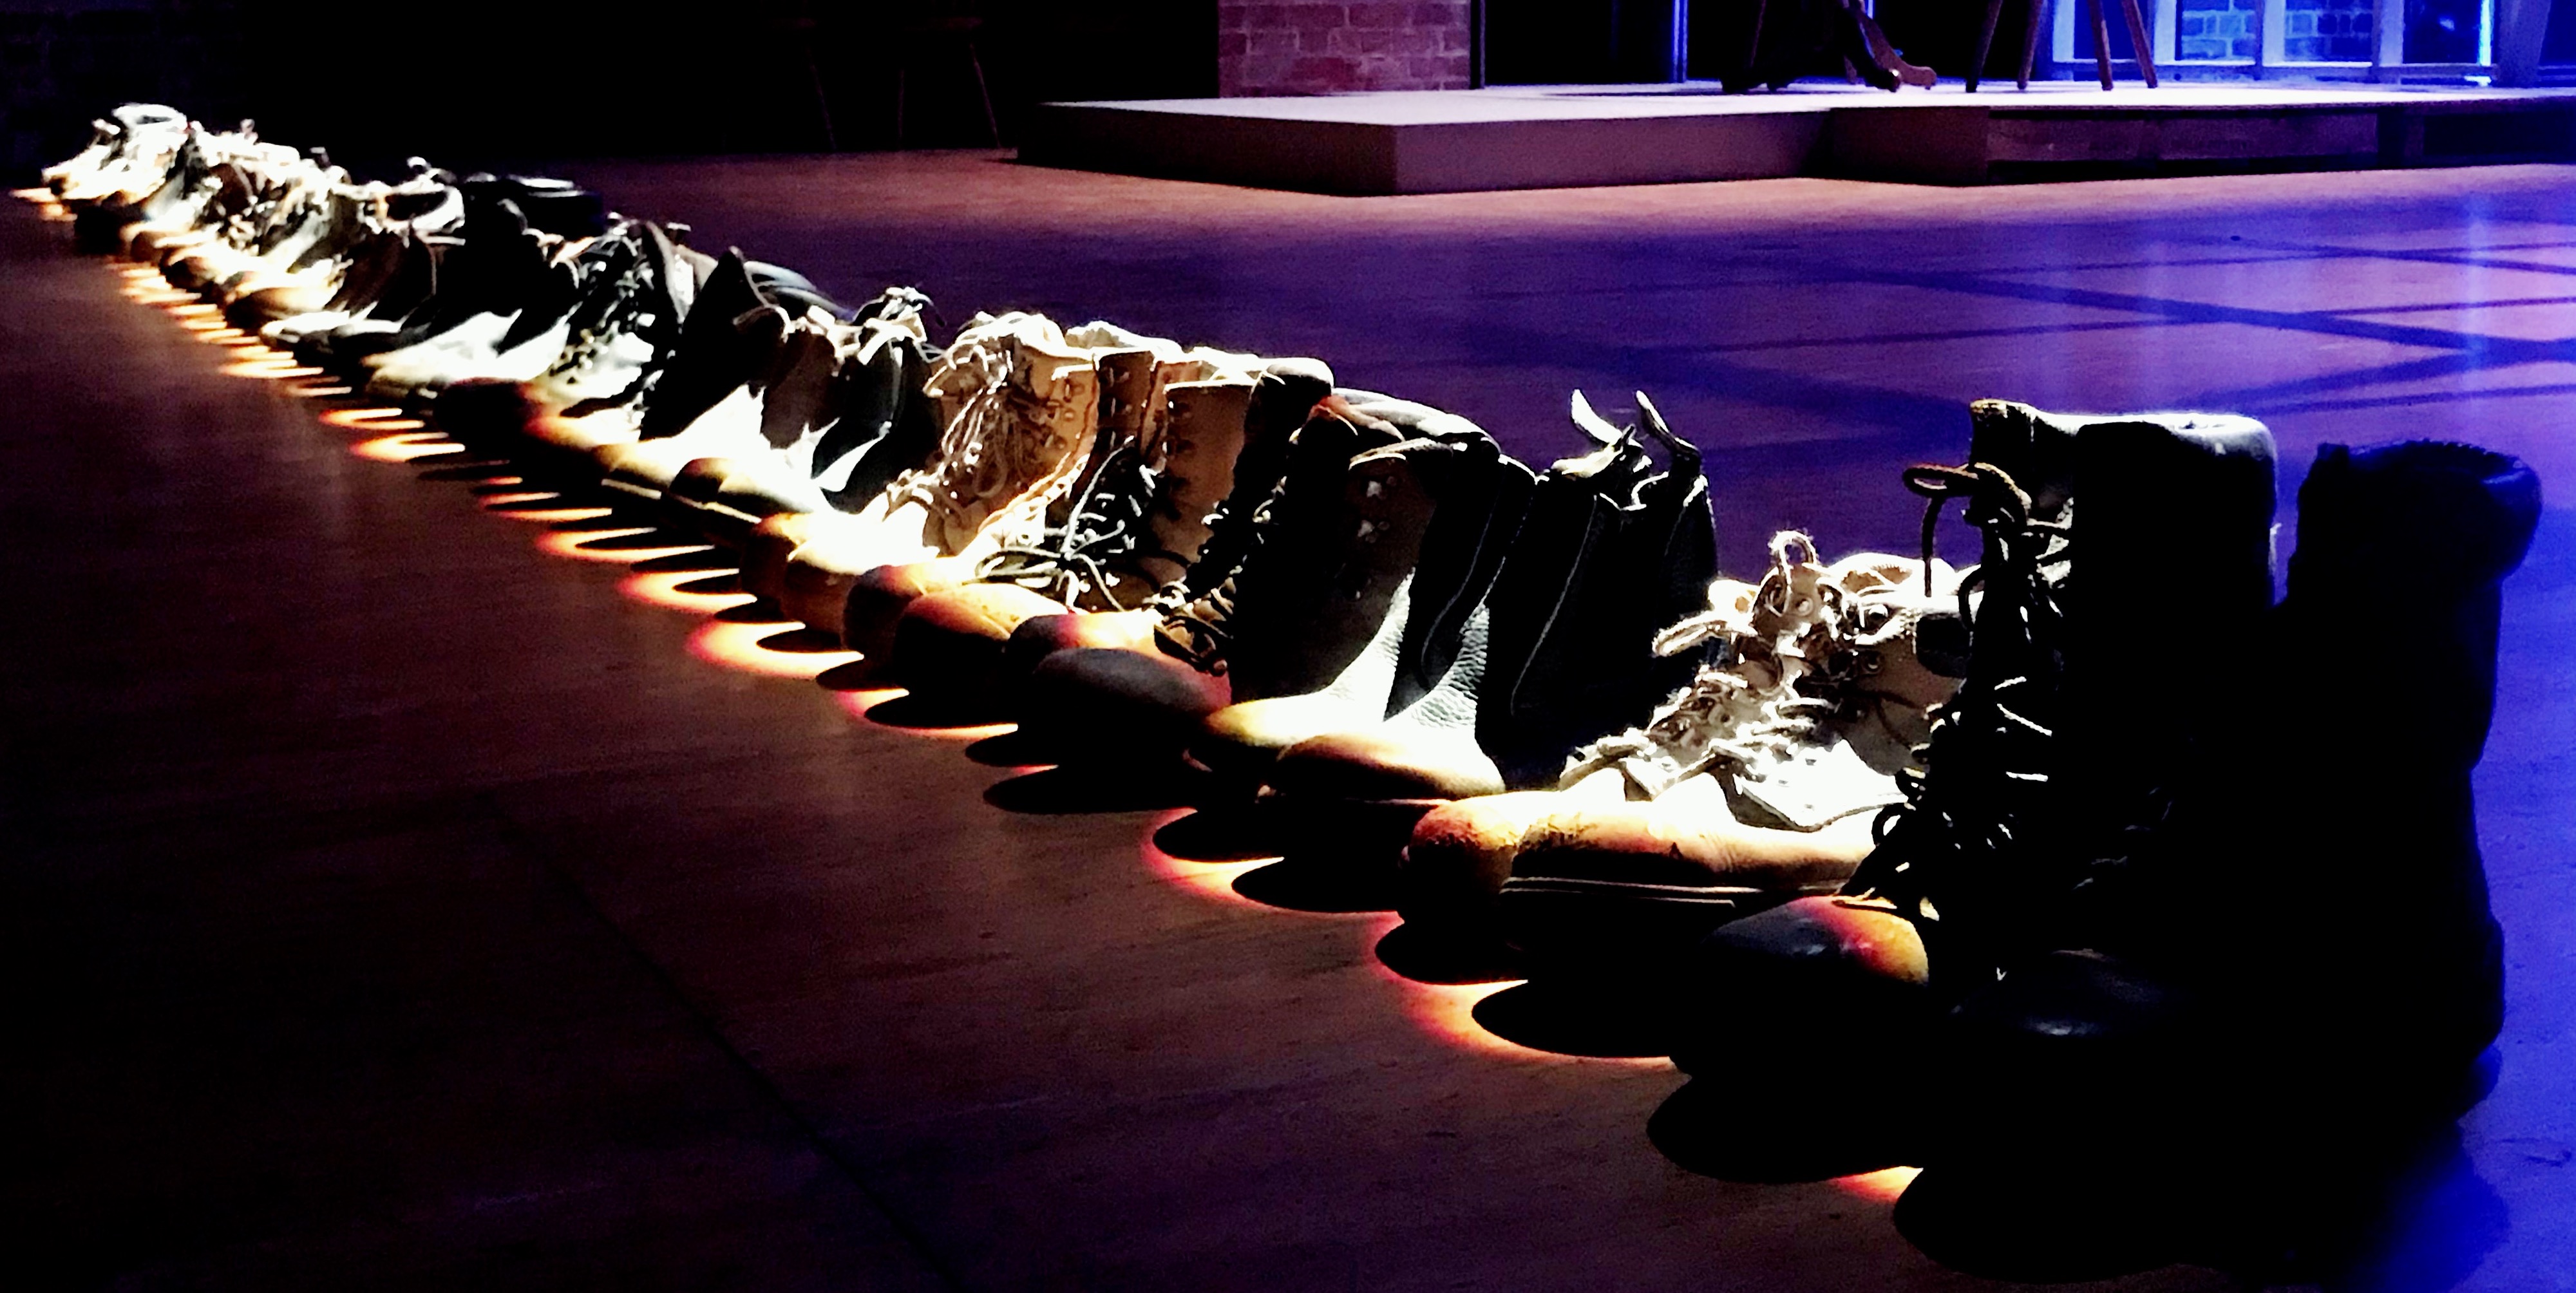 Photo by Elizabeth Humphrys: Final scene of the play 'The Bridge'. 35 pairs of boots for the 35 workers killed in the disaster, placed in a line across the front of the stage.